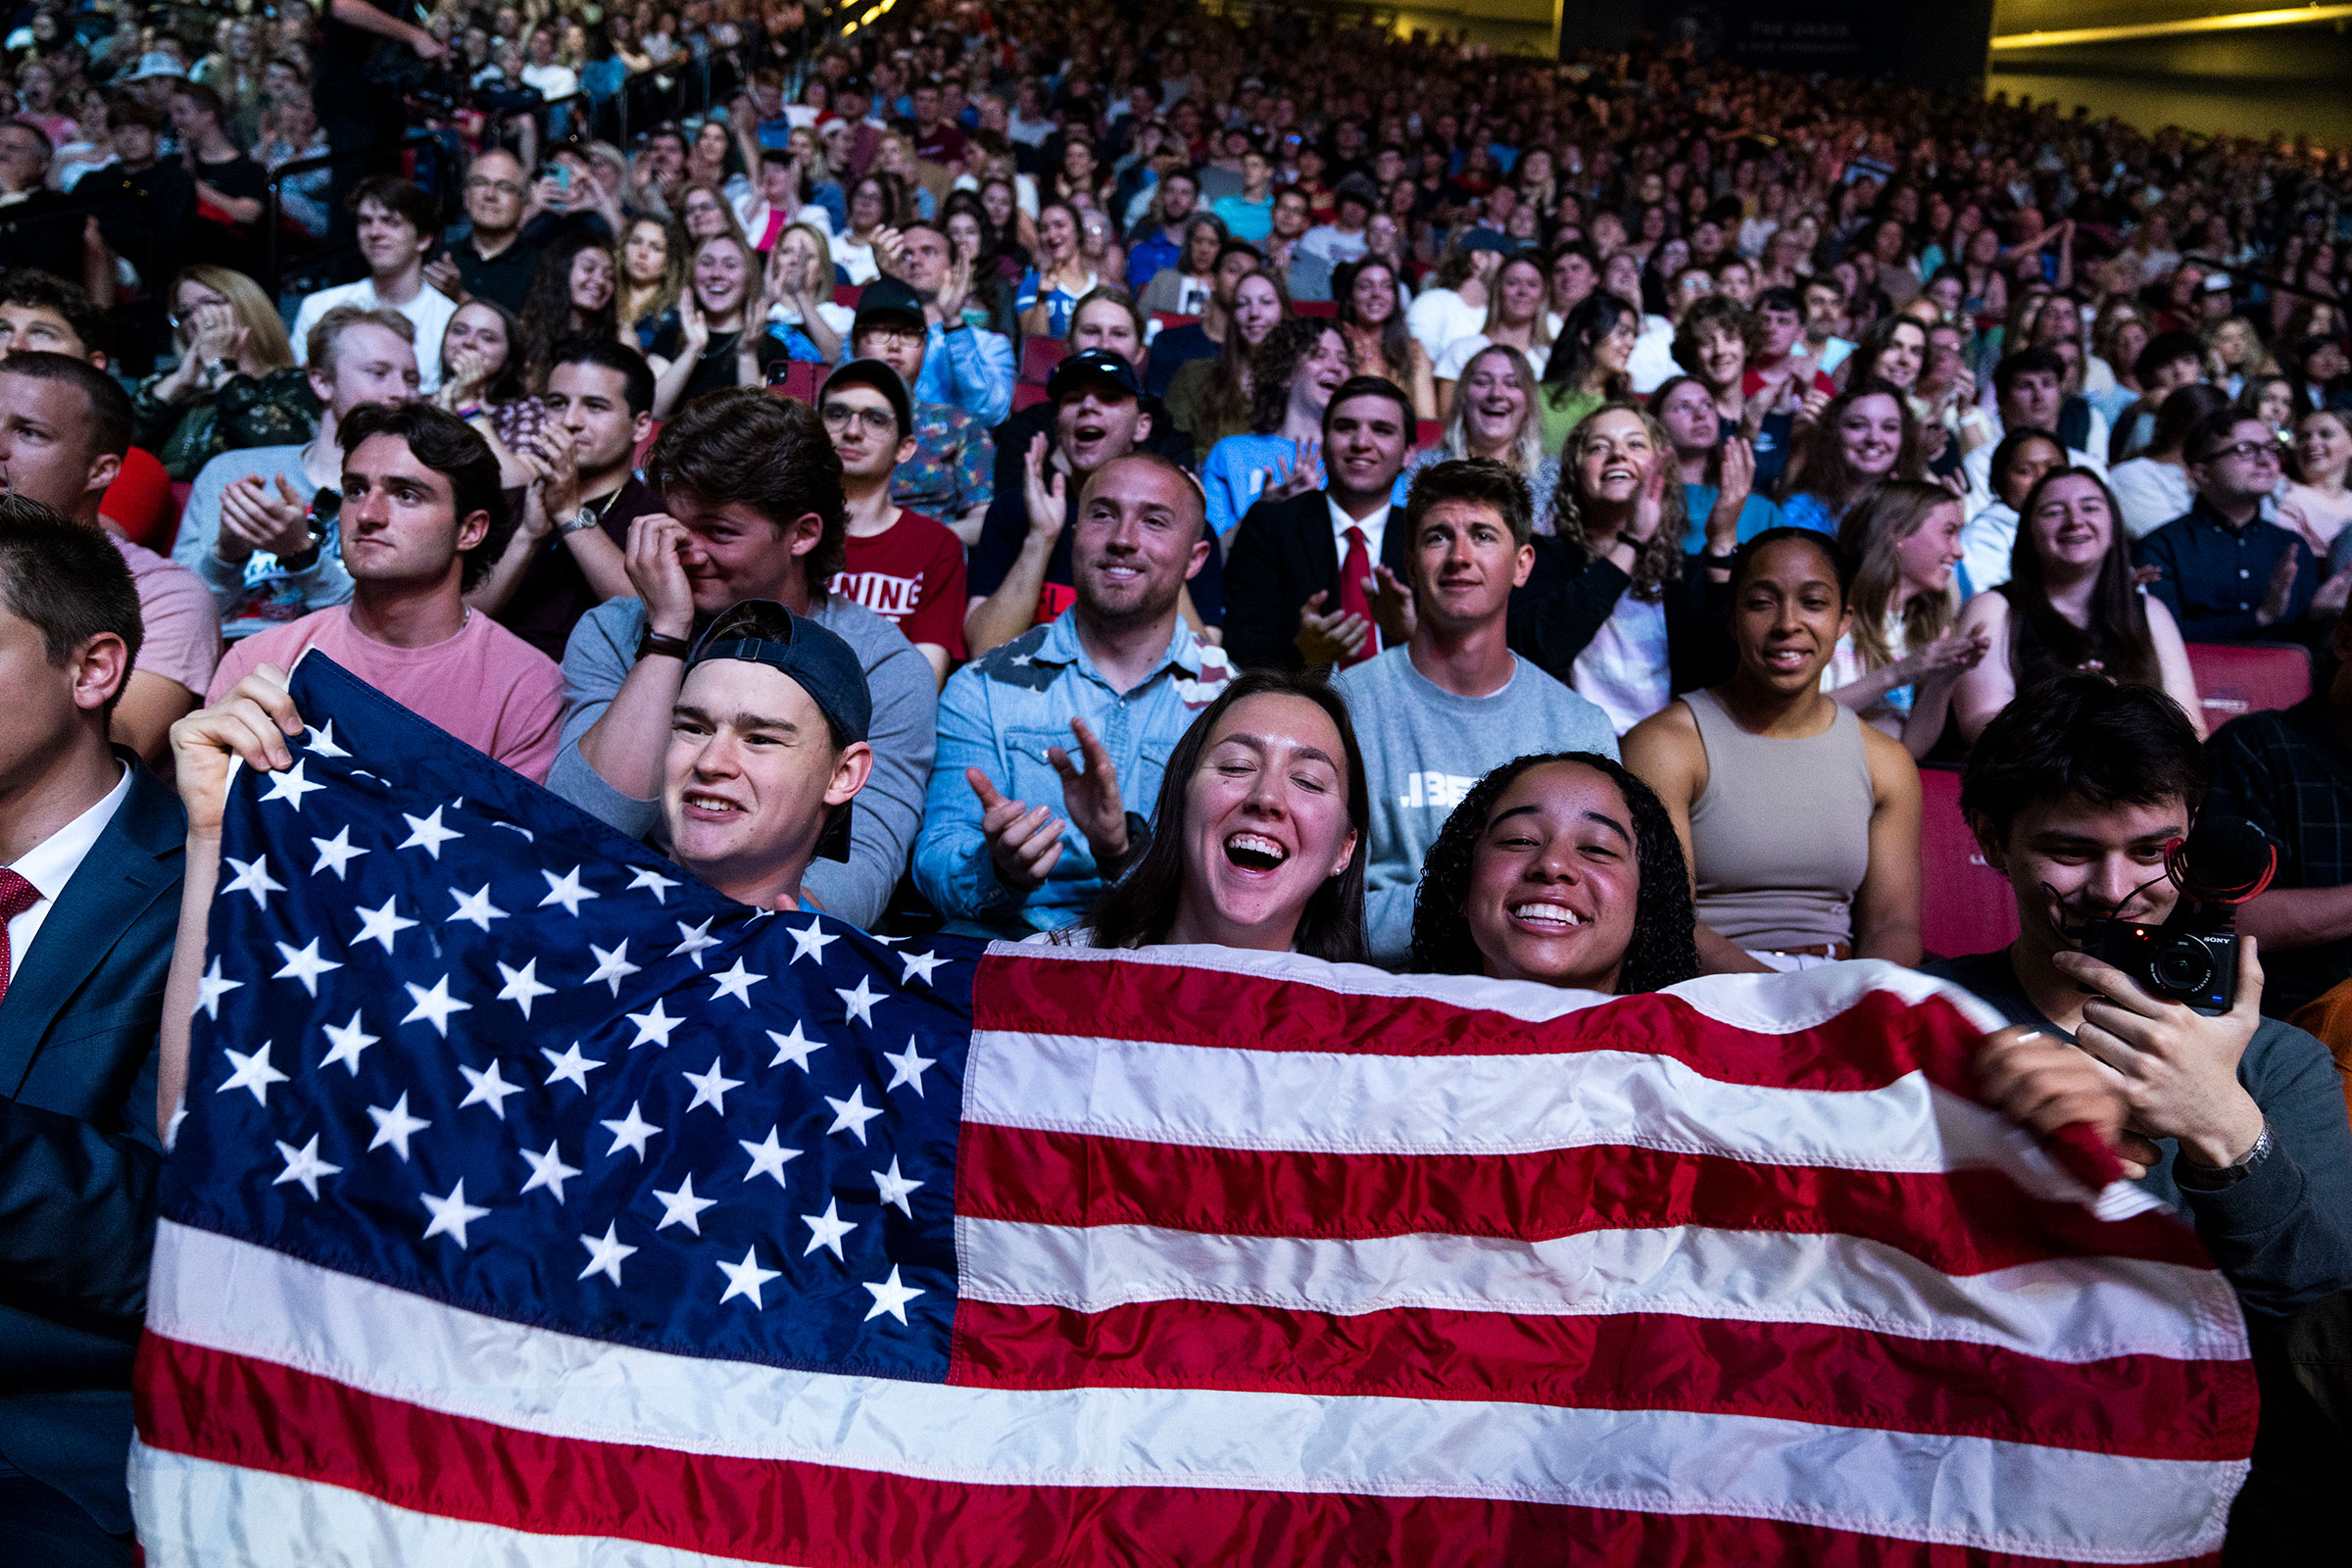 Students cheer during a DeSantis speech at Liberty University in Lynchburg, Va., on April 14 (Tom Williams—CQ-Roll Call/Getty Images)